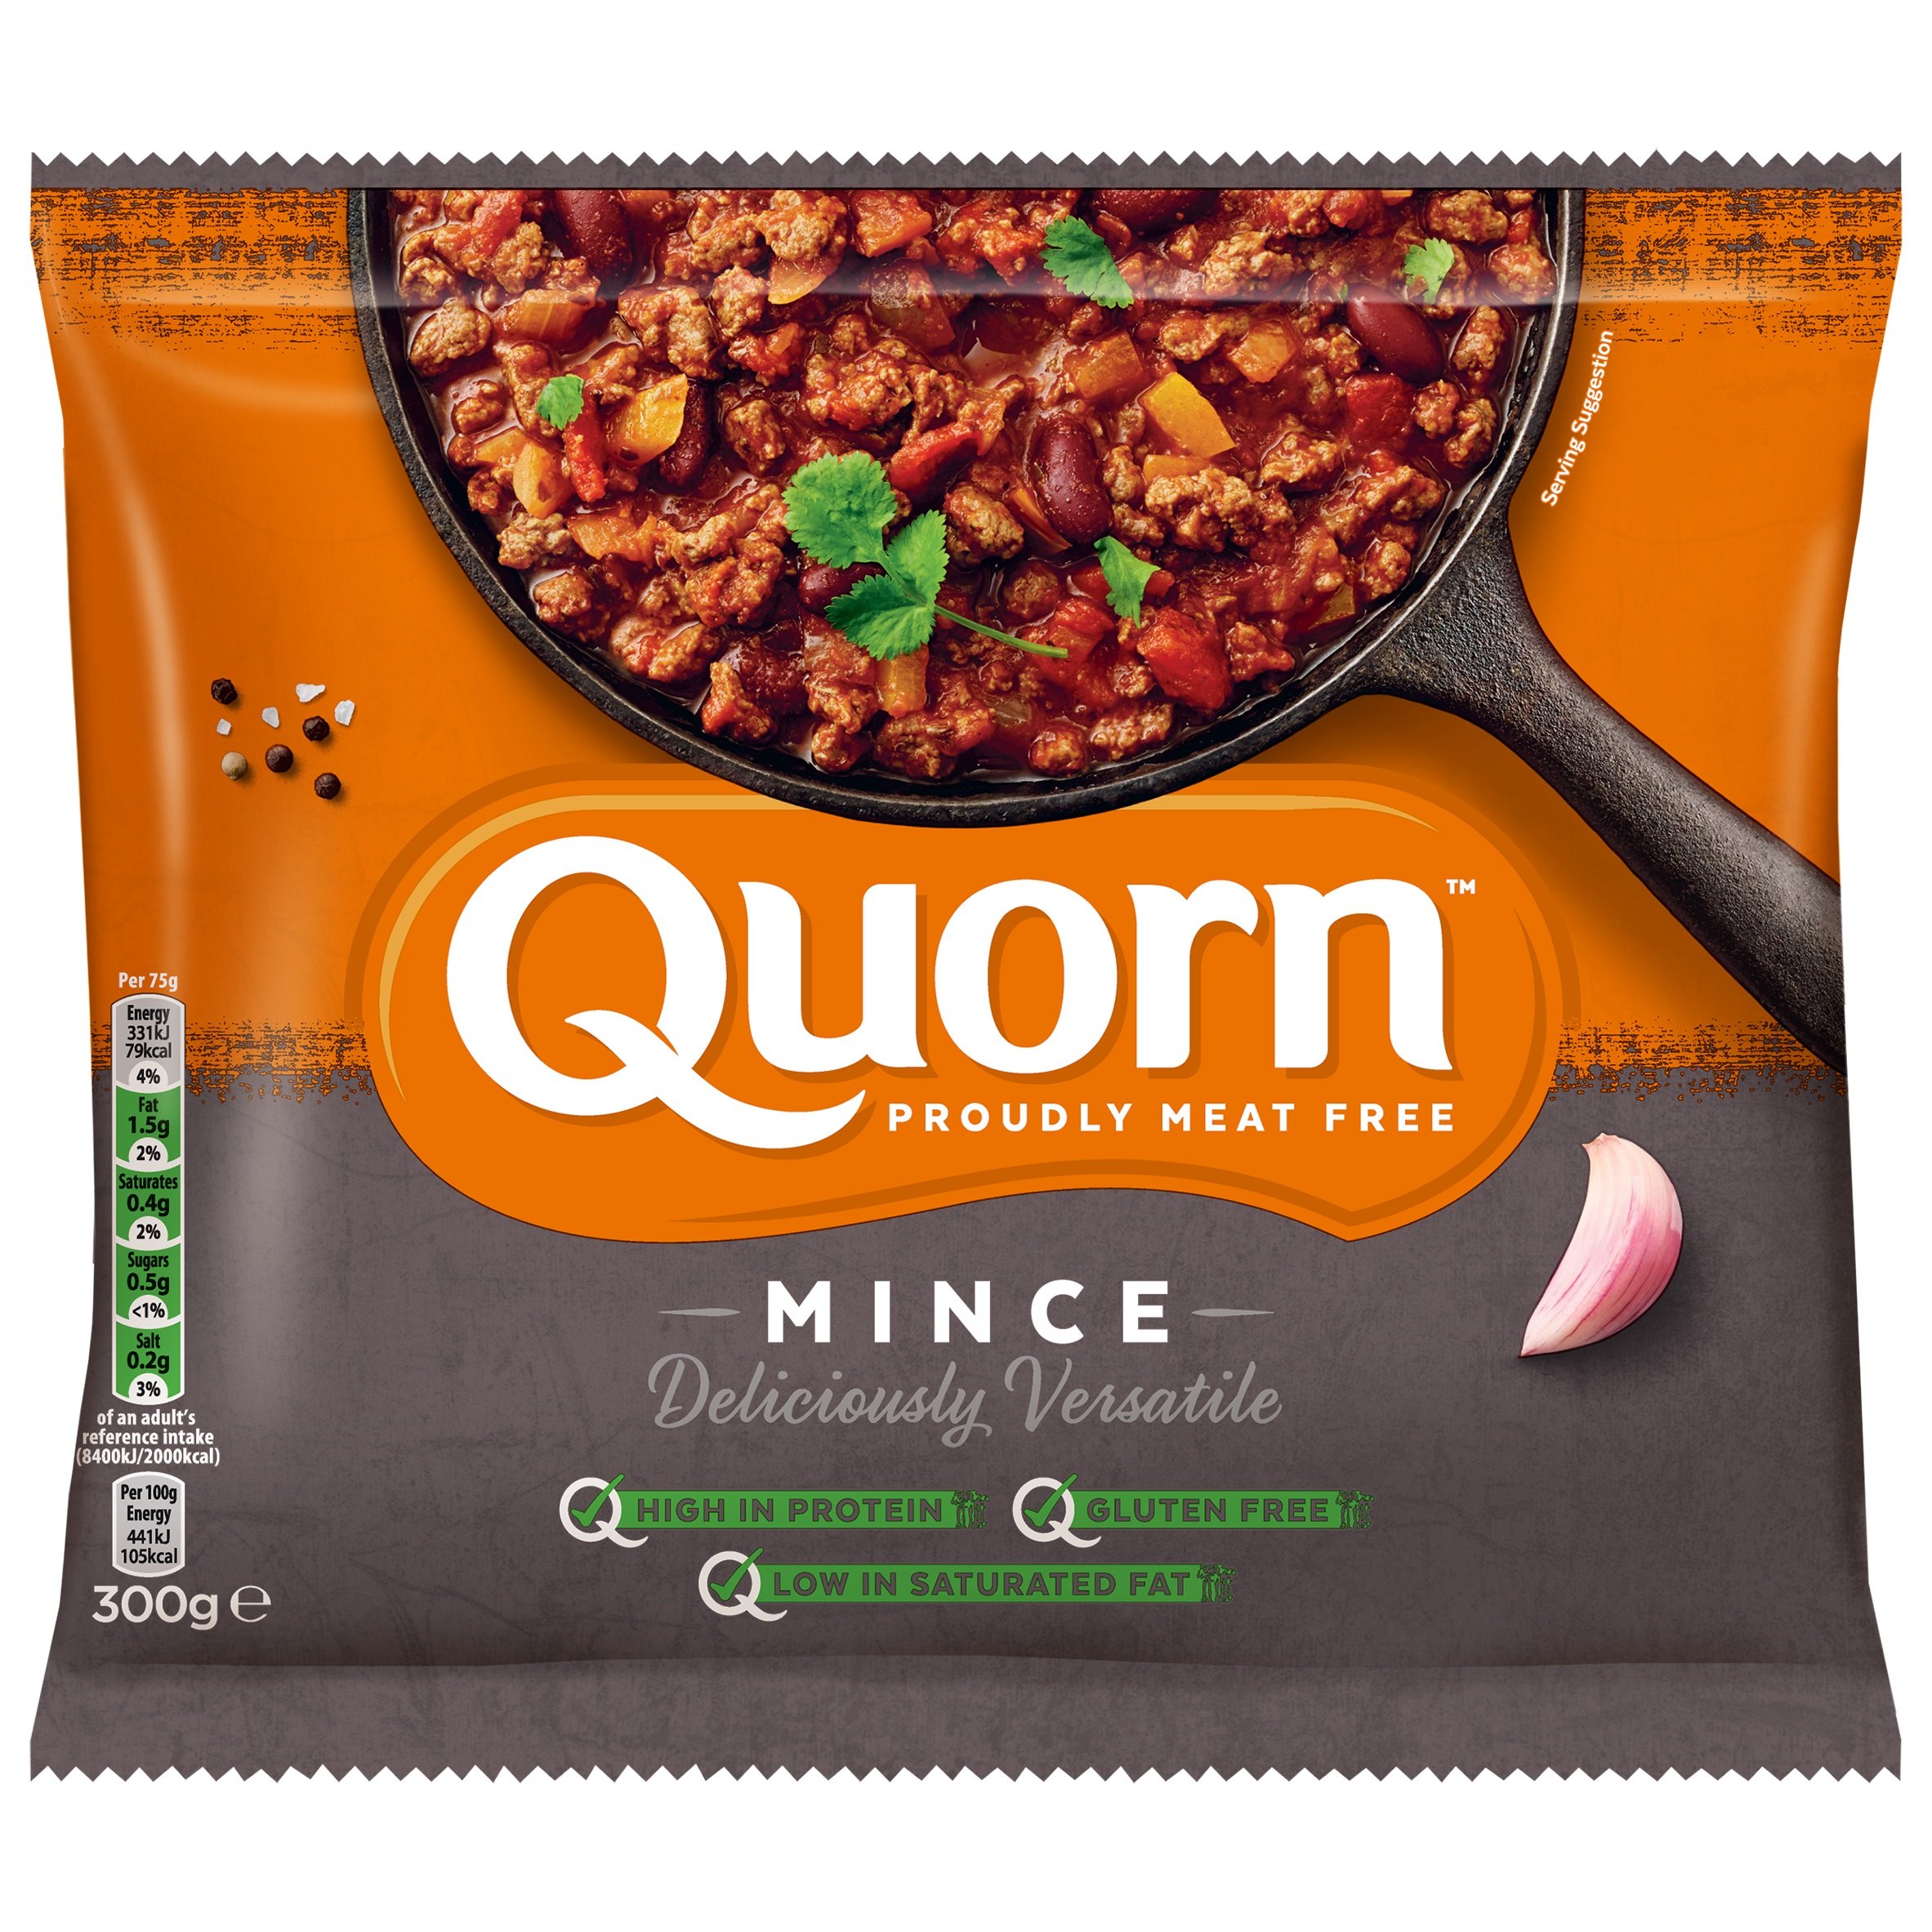 Quorn protein on par with animal sources